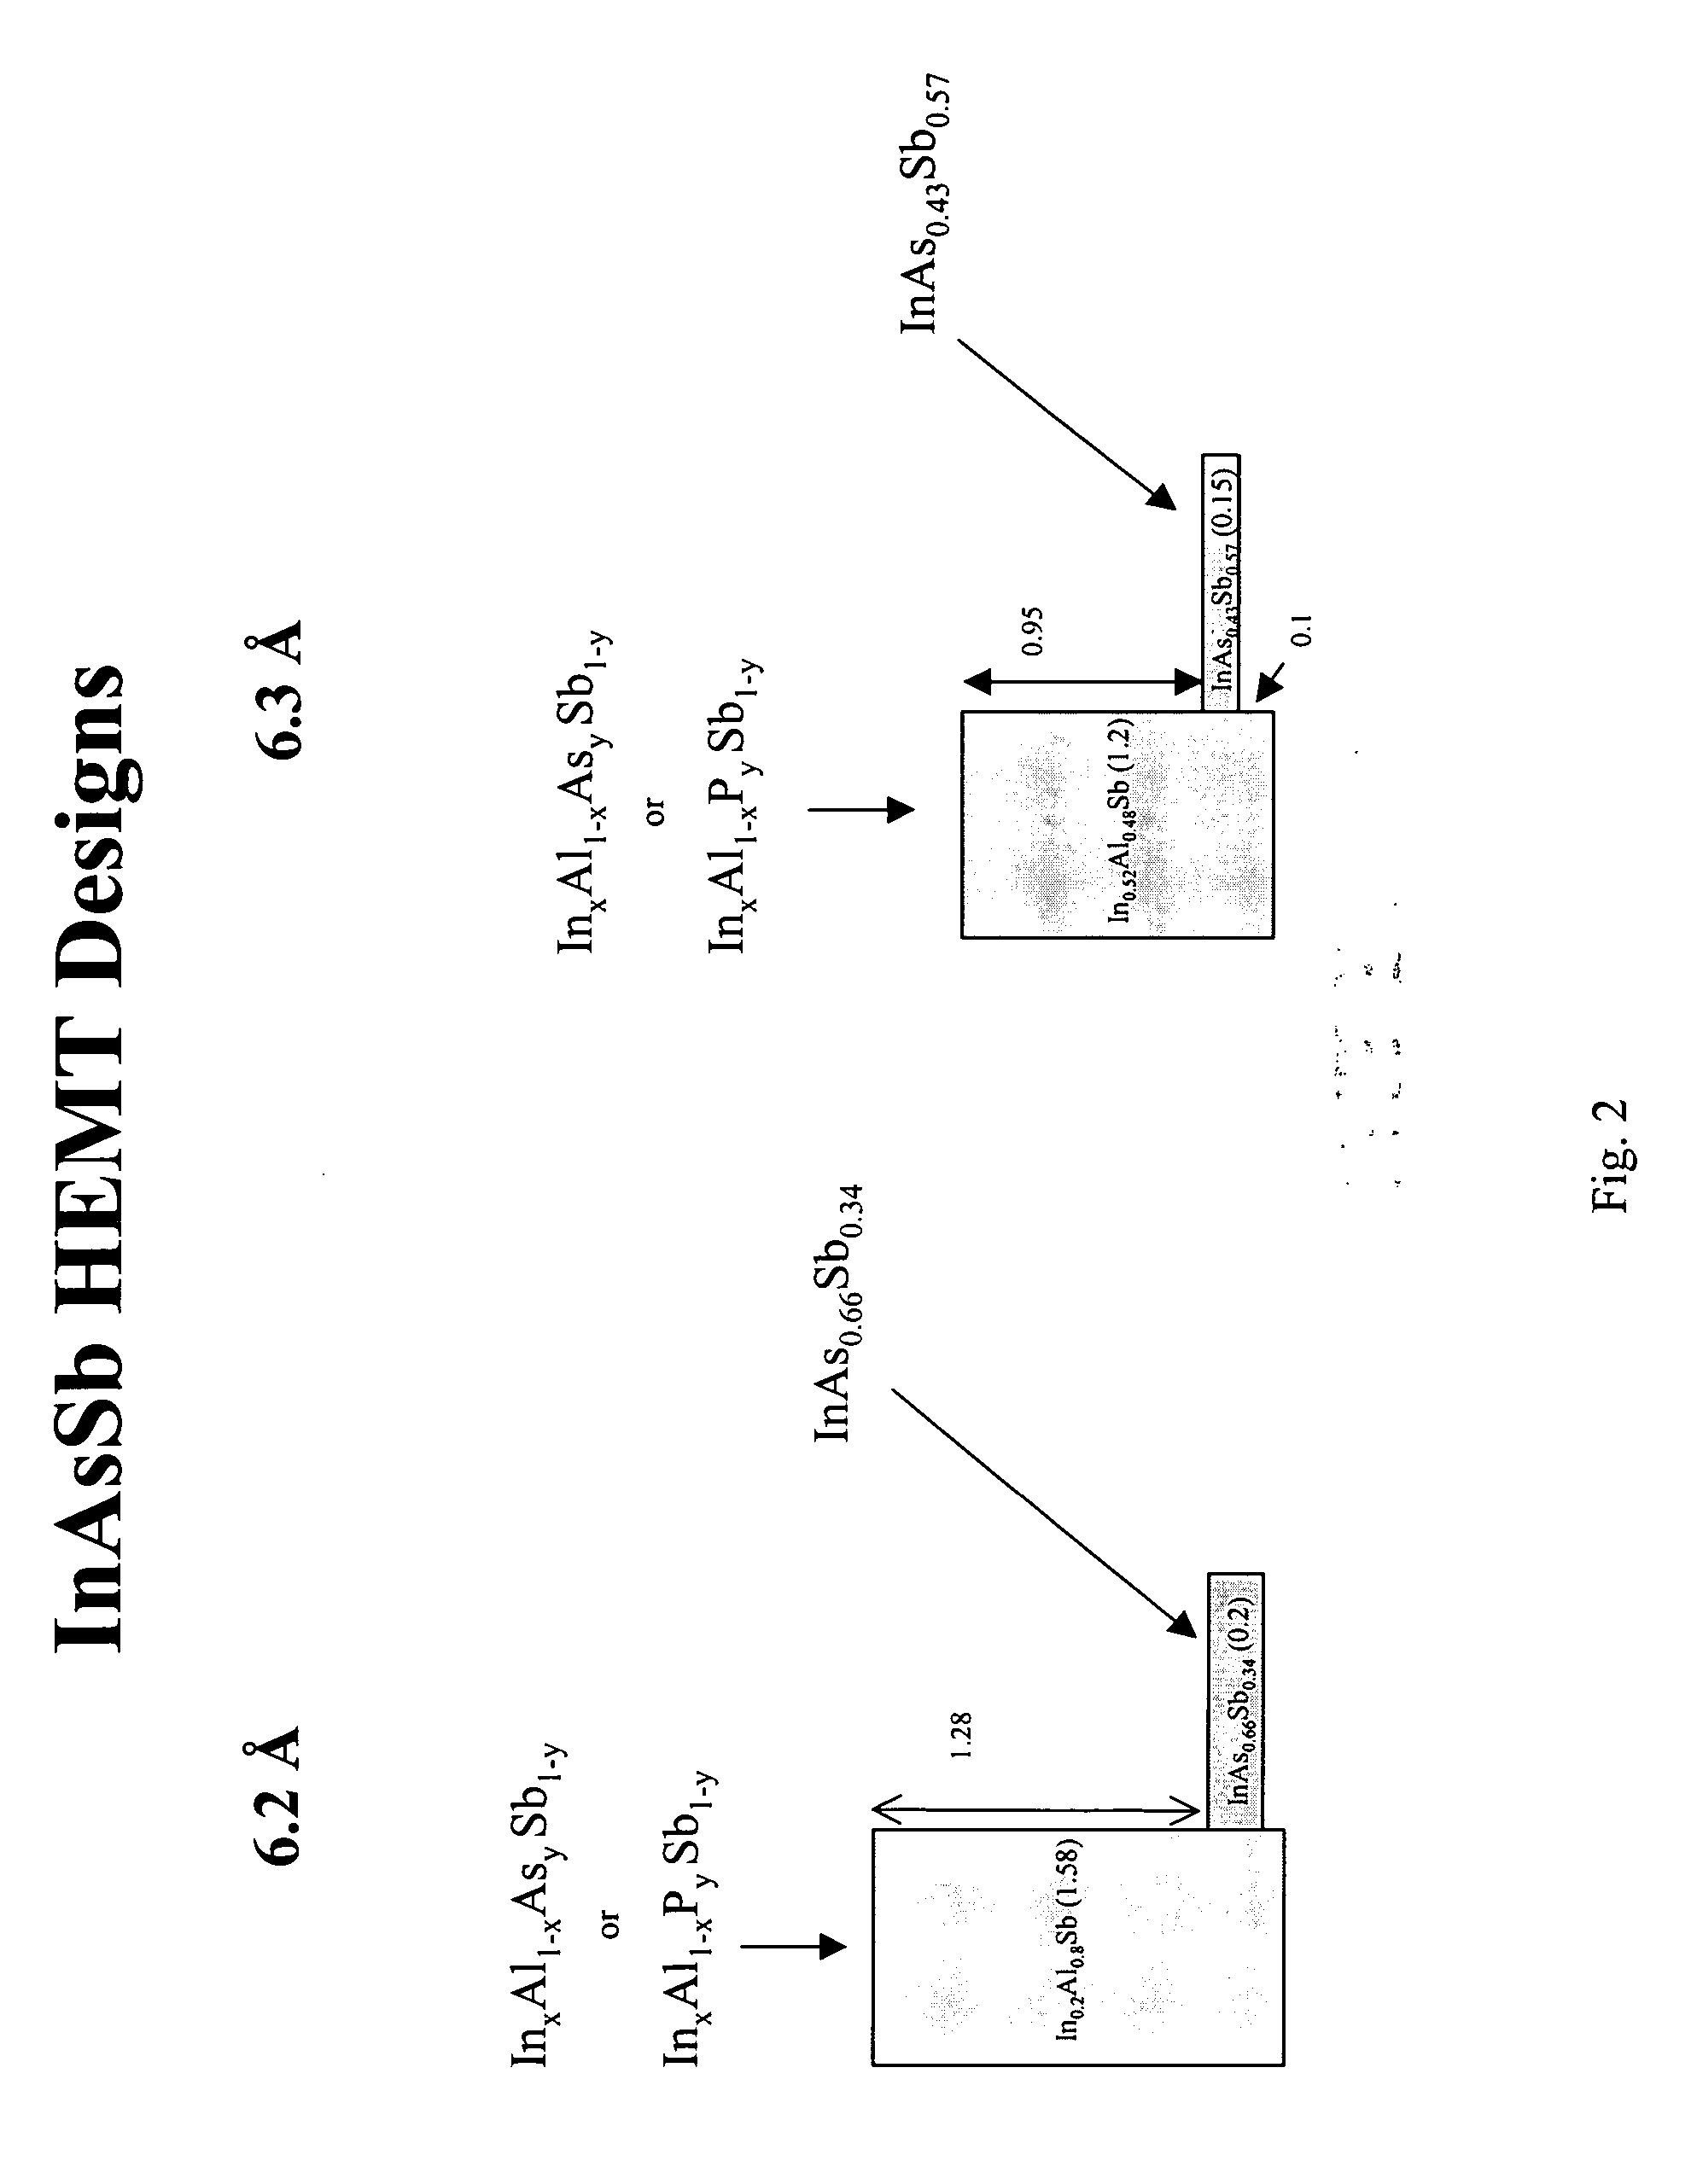 High electron mobility transistors with Sb-based channels